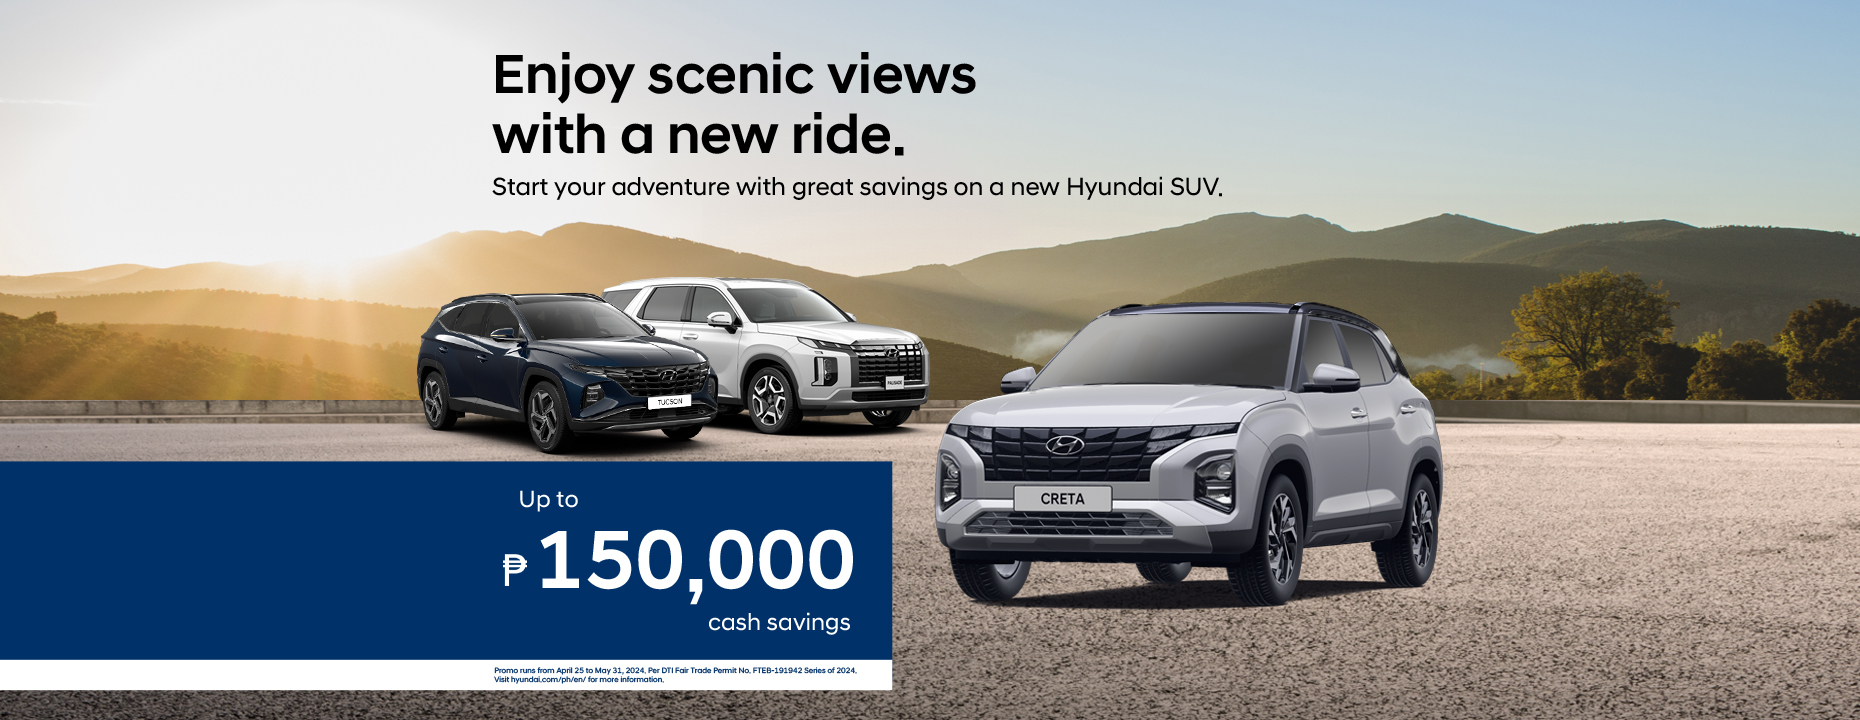 hyundai crossover vehicles in a festive background with sales promo details